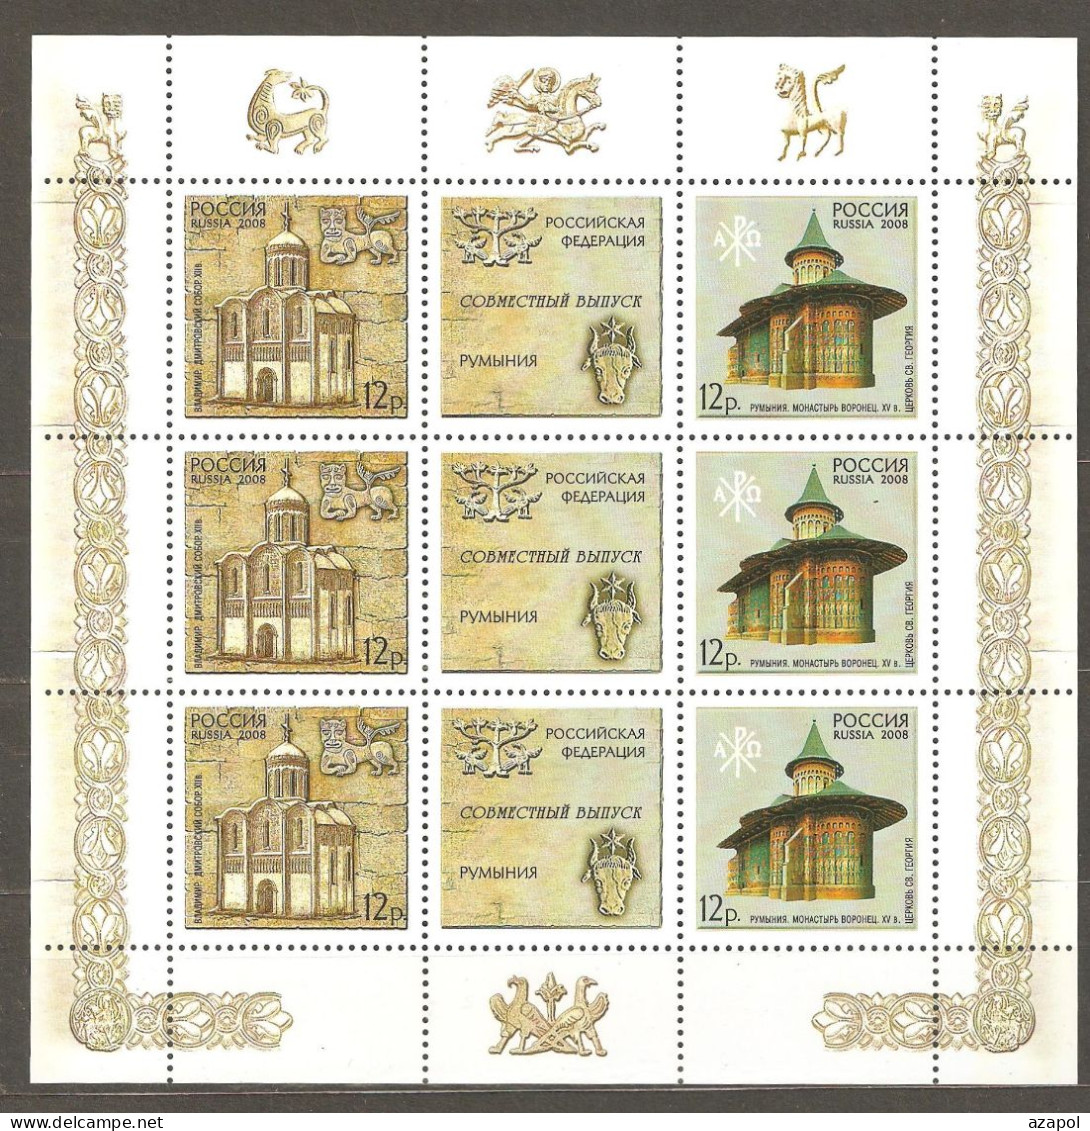 Russia: Mint Sheetlet, Churches, UNESCO World Heritage, 2008, Mi#1469-70, MNH. Join Issue With Romania - Emissioni Congiunte